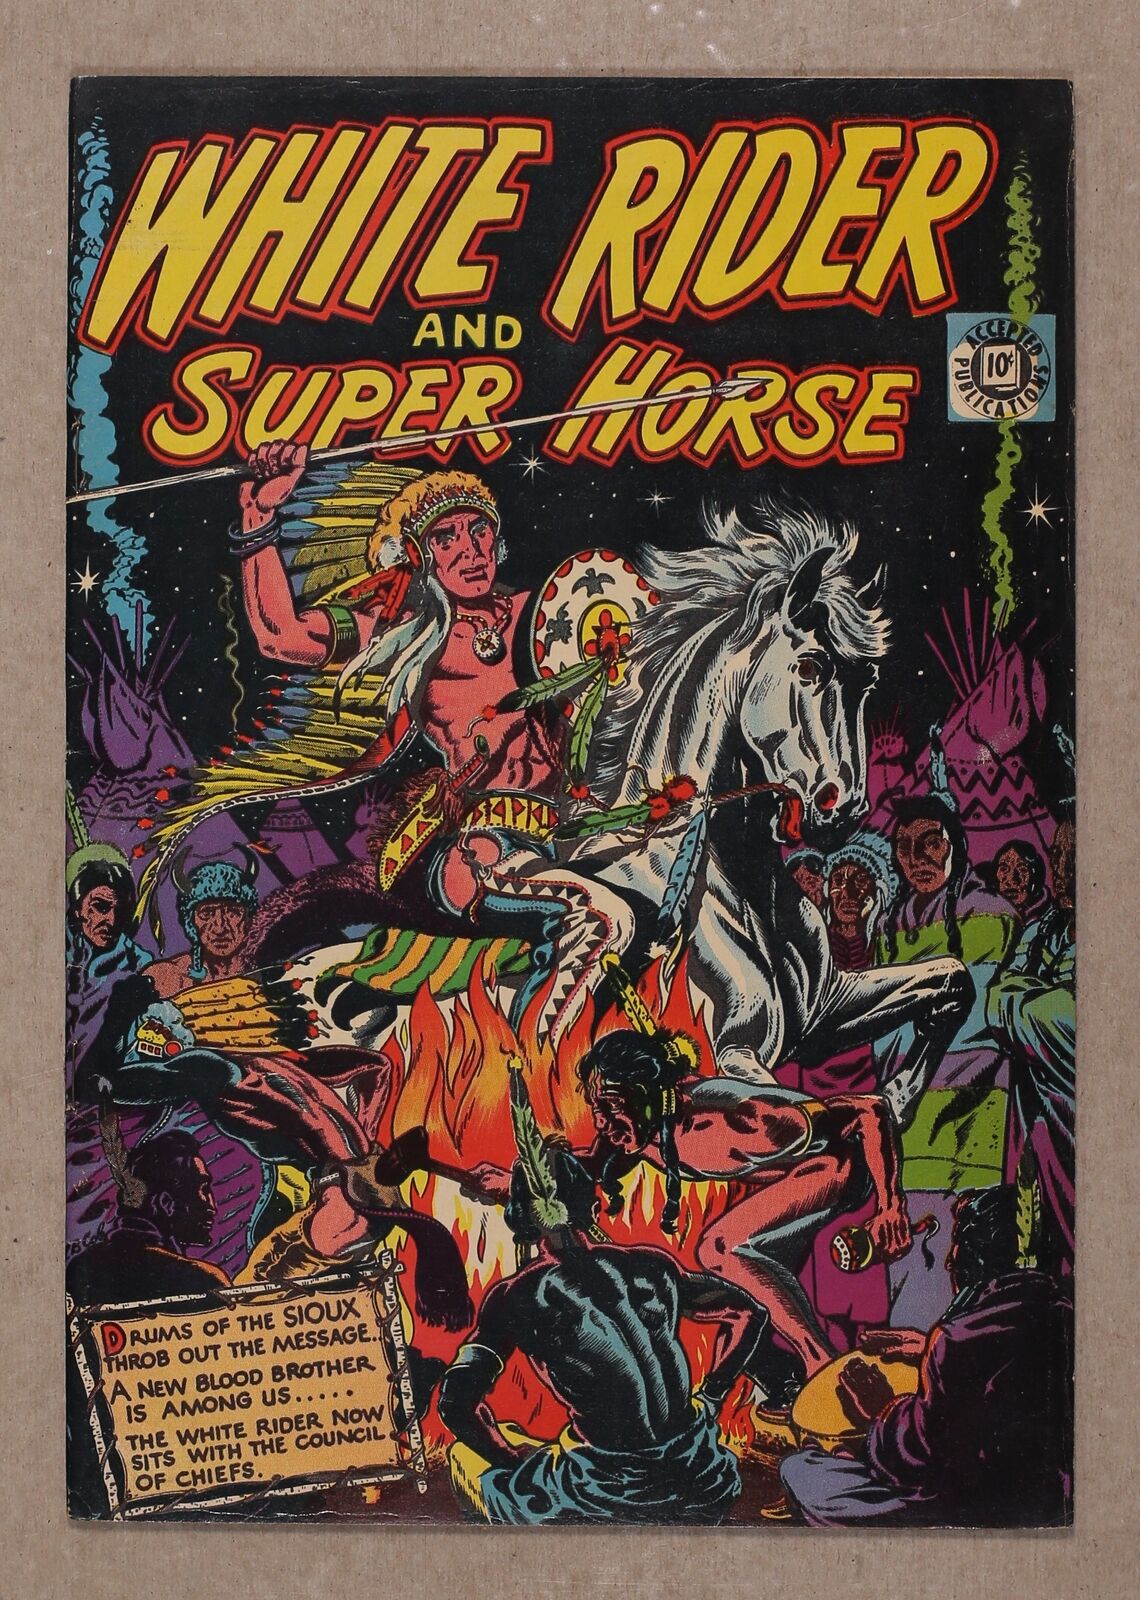 White Rider and Superhorse Reprint #6 FN 6.0 1950